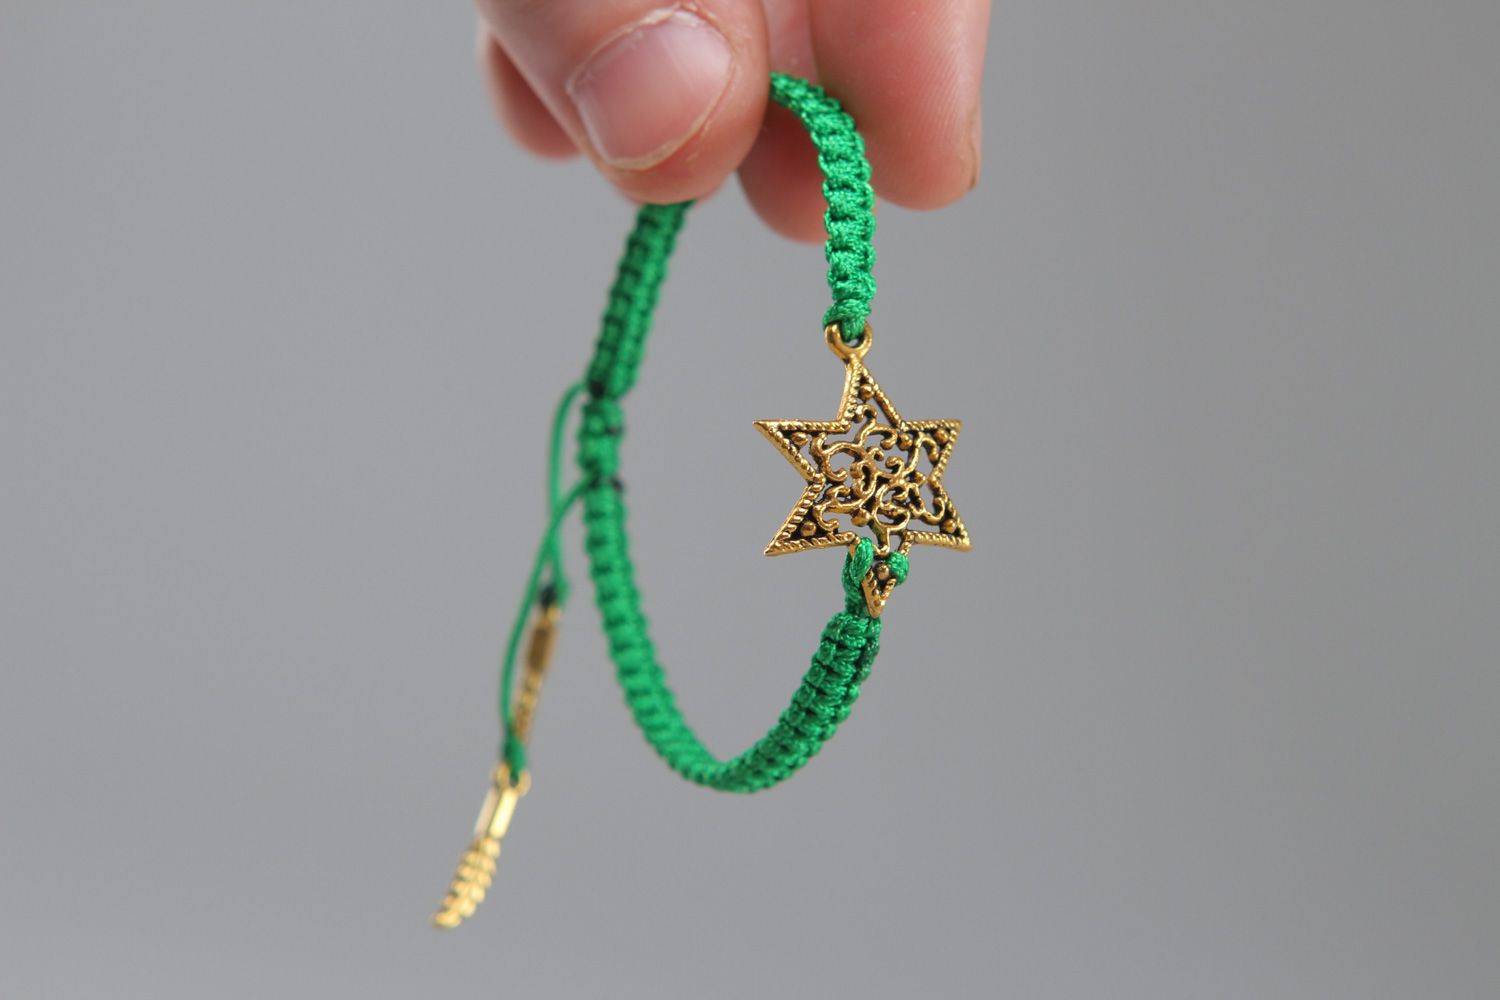 Handmade friendship bracelet woven of green cord with metal star for girls photo 3